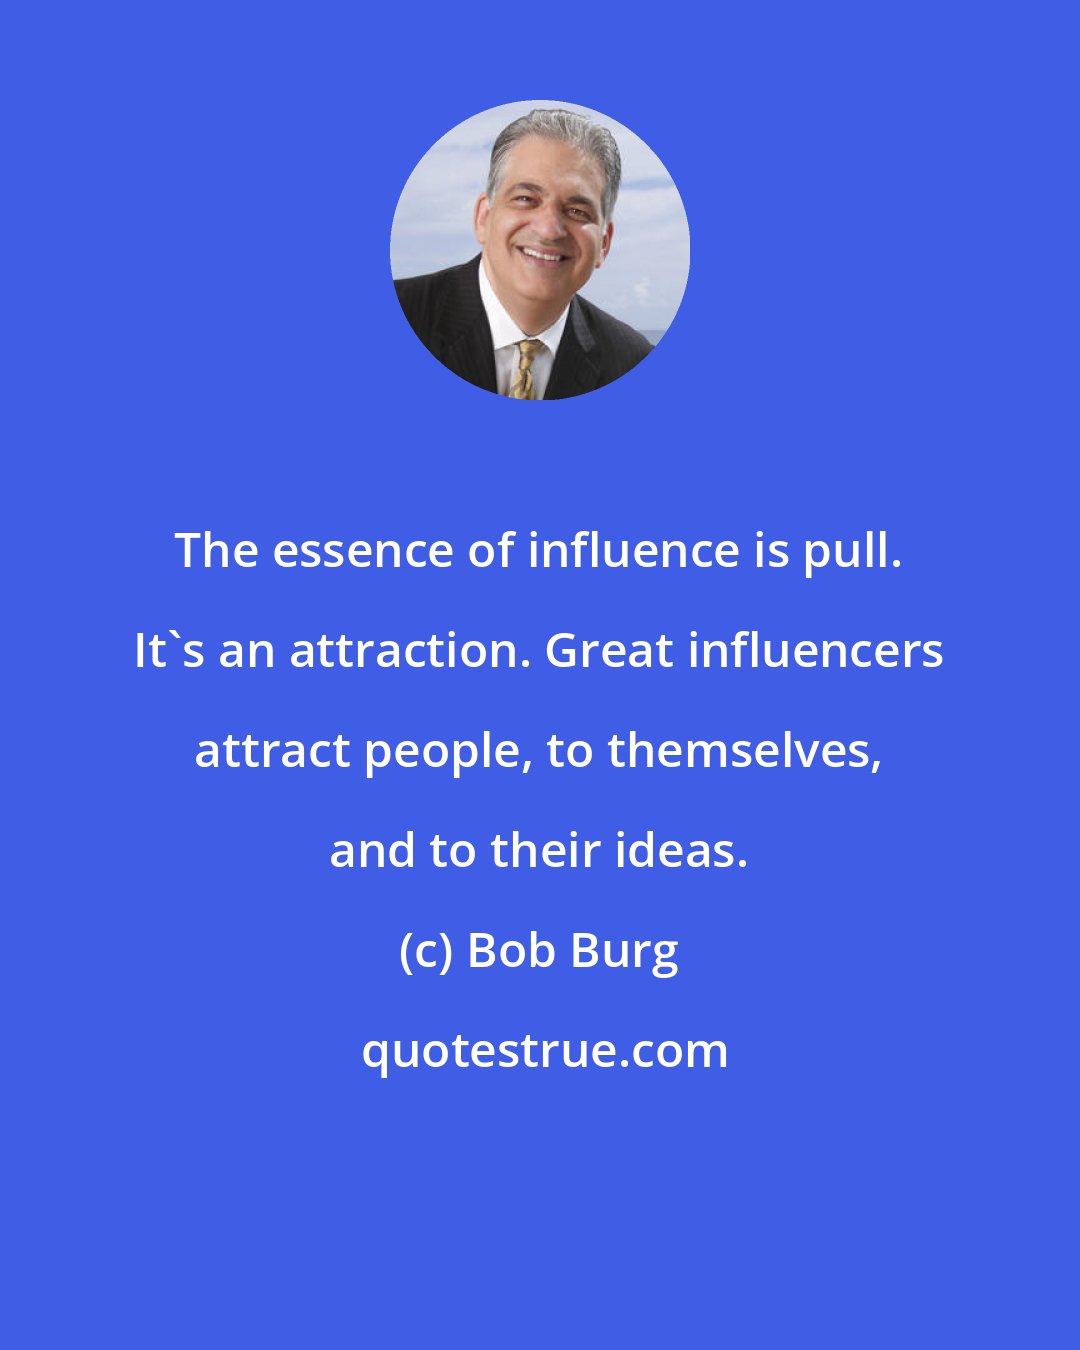 Bob Burg: The essence of influence is pull. It's an attraction. Great influencers attract people, to themselves, and to their ideas.